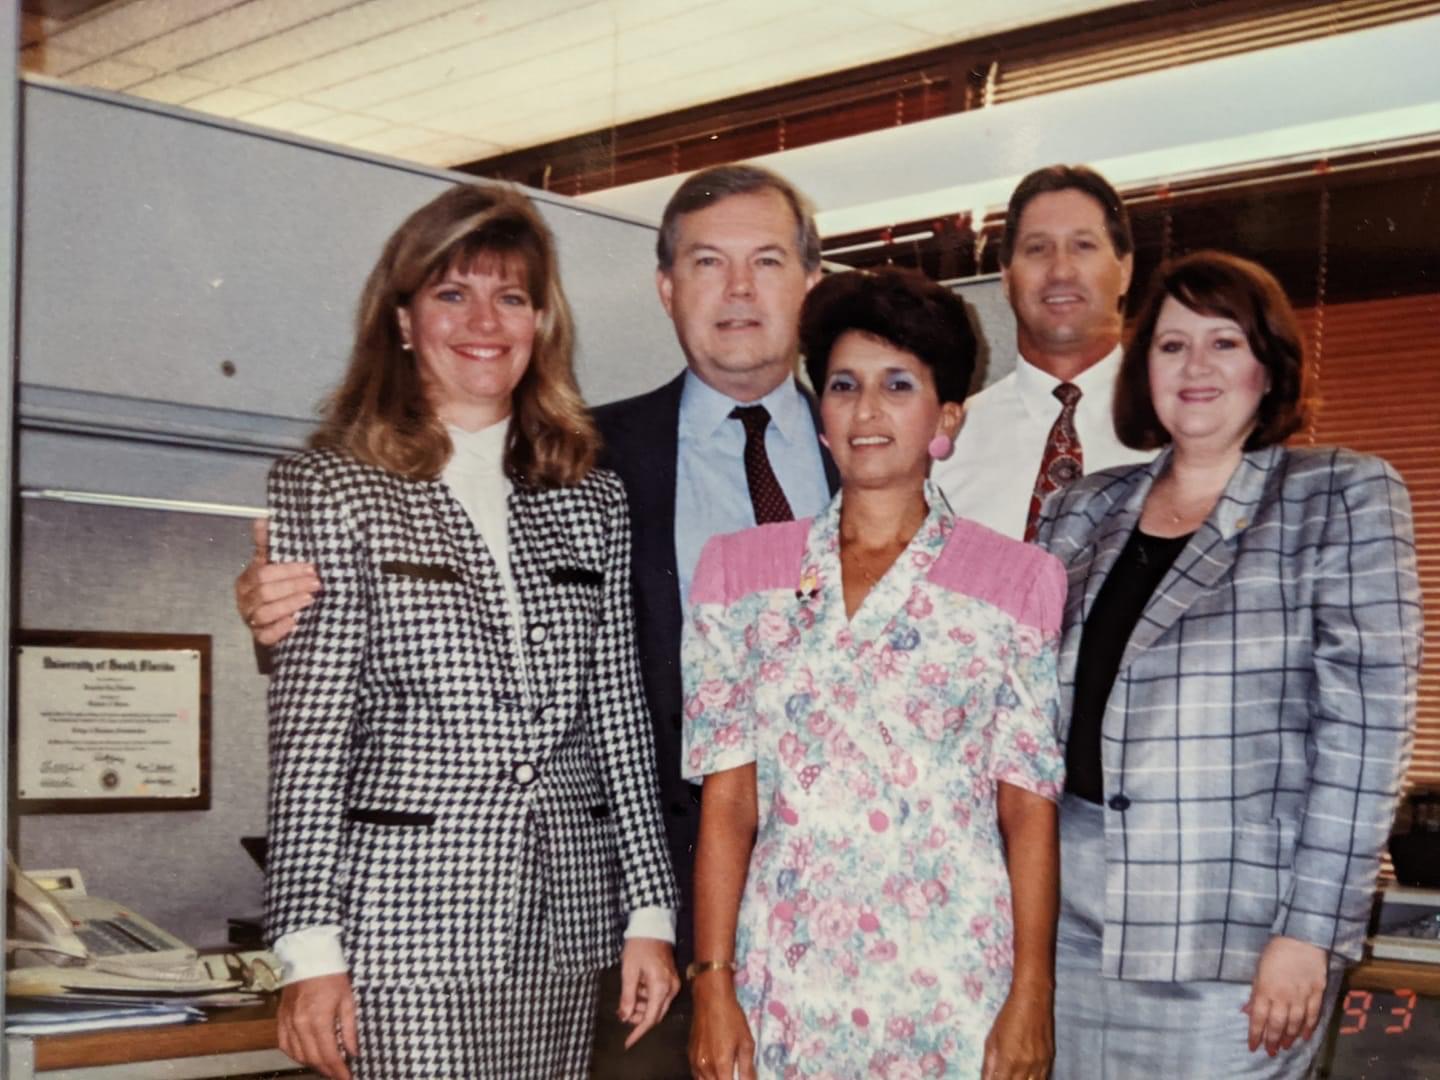 HR in the 90’s<br />
Jackie, Patrick, Clint, Deborah and Betty